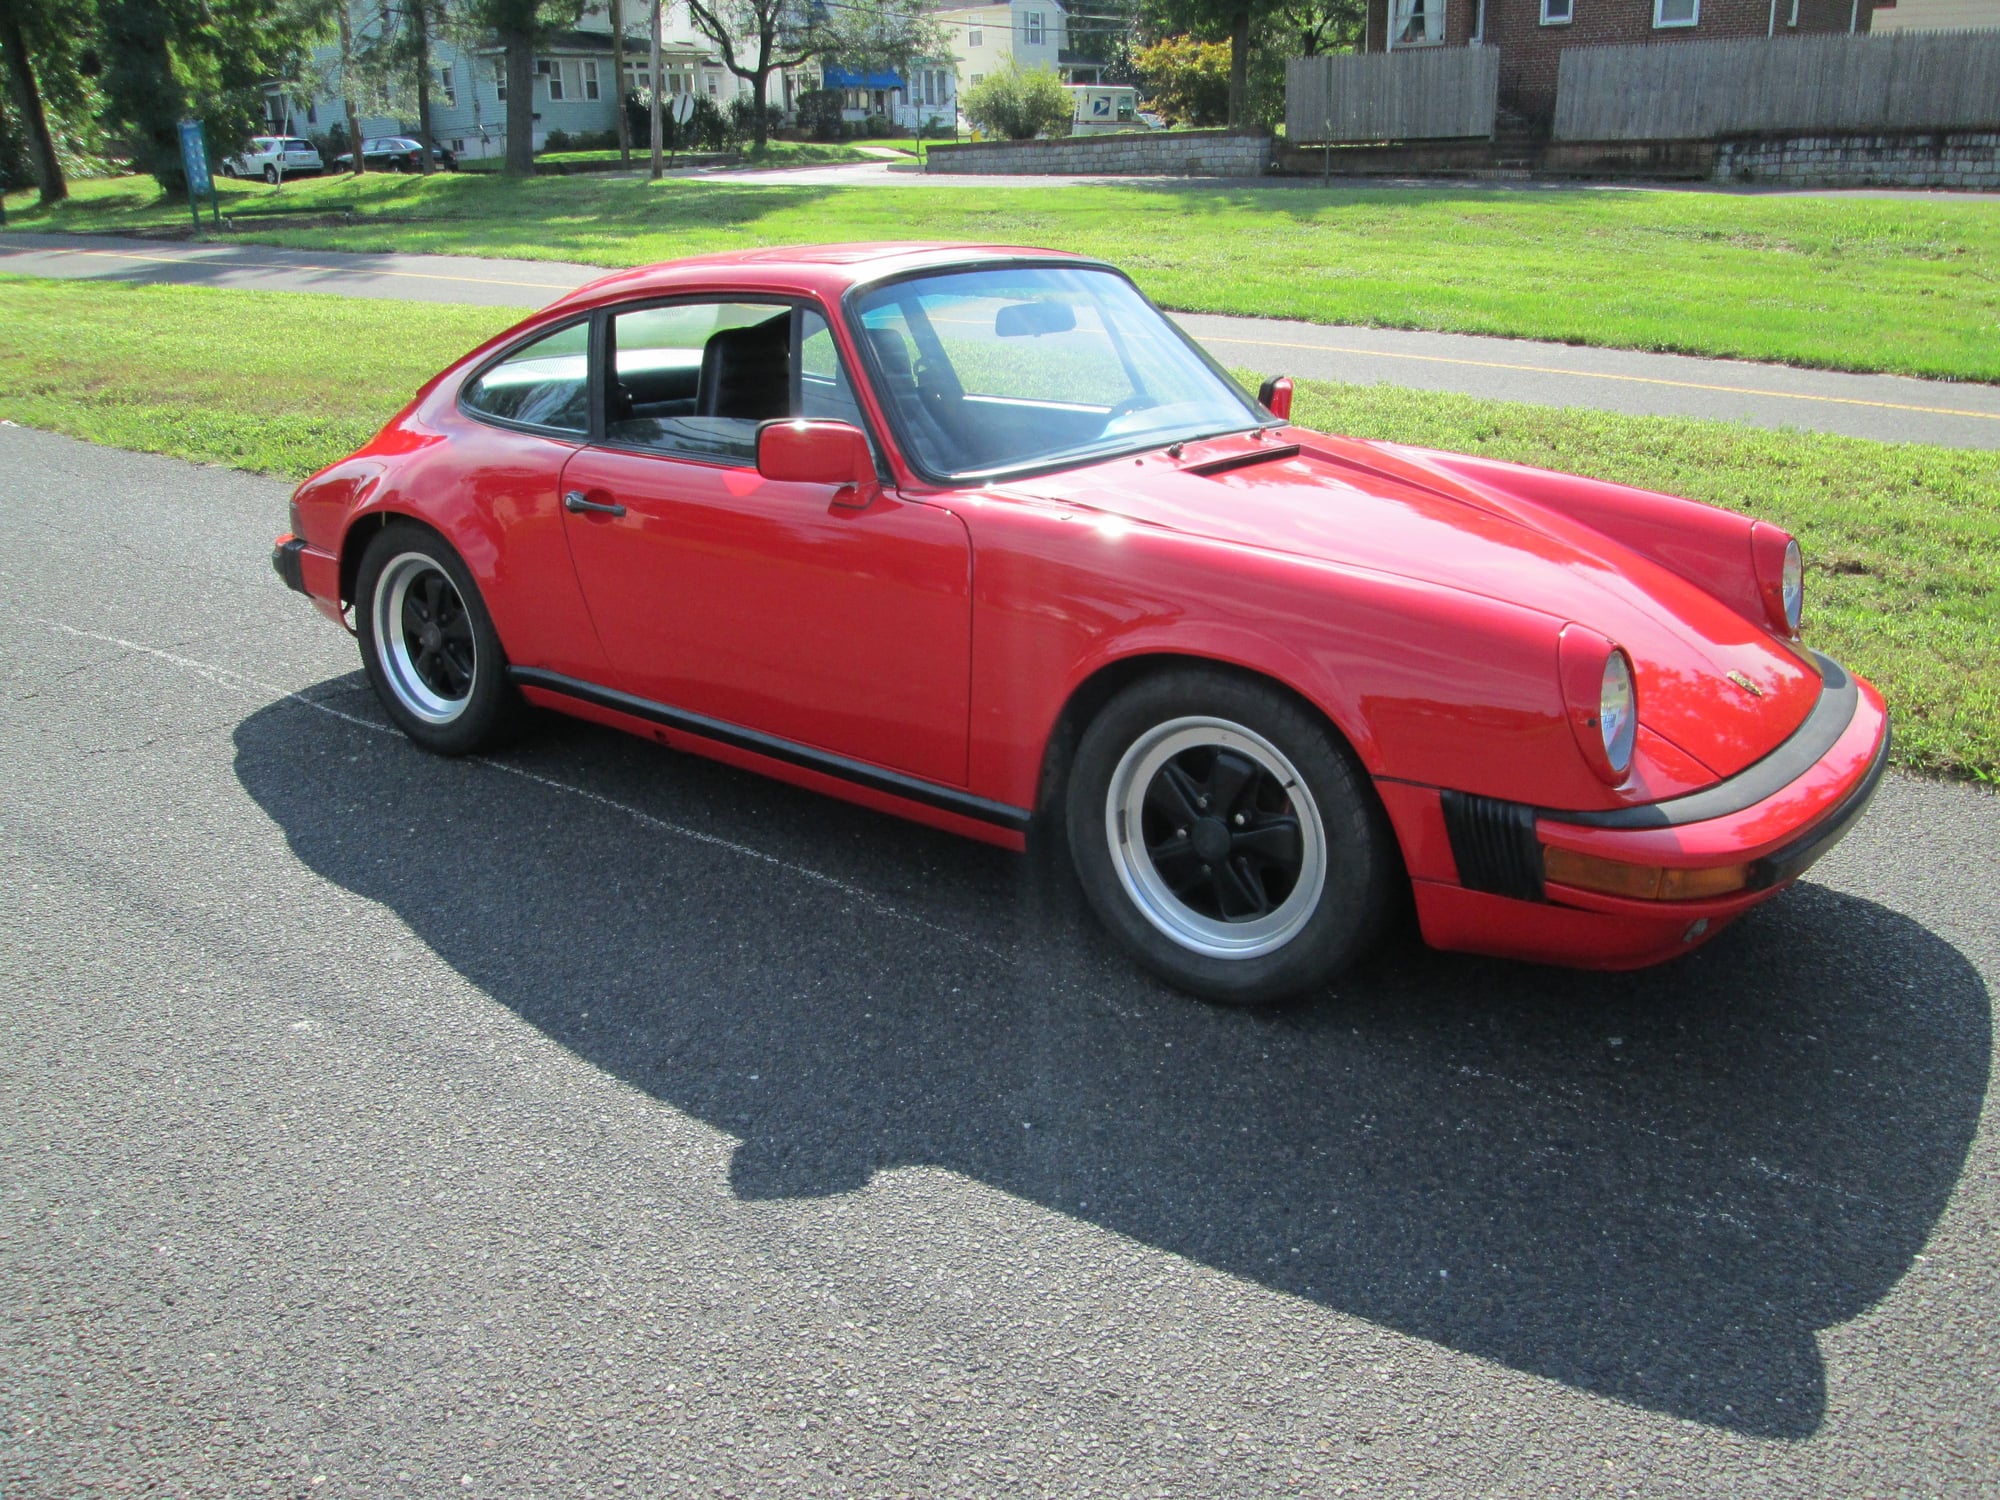 1981 Porsche 911 - 1981  porsche  911  SC - Used - VIN wp0aa0913bs120914 - 122,126 Miles - 6 cyl - 2WD - Manual - Coupe - Red - Merchantville, NJ 08109, United States